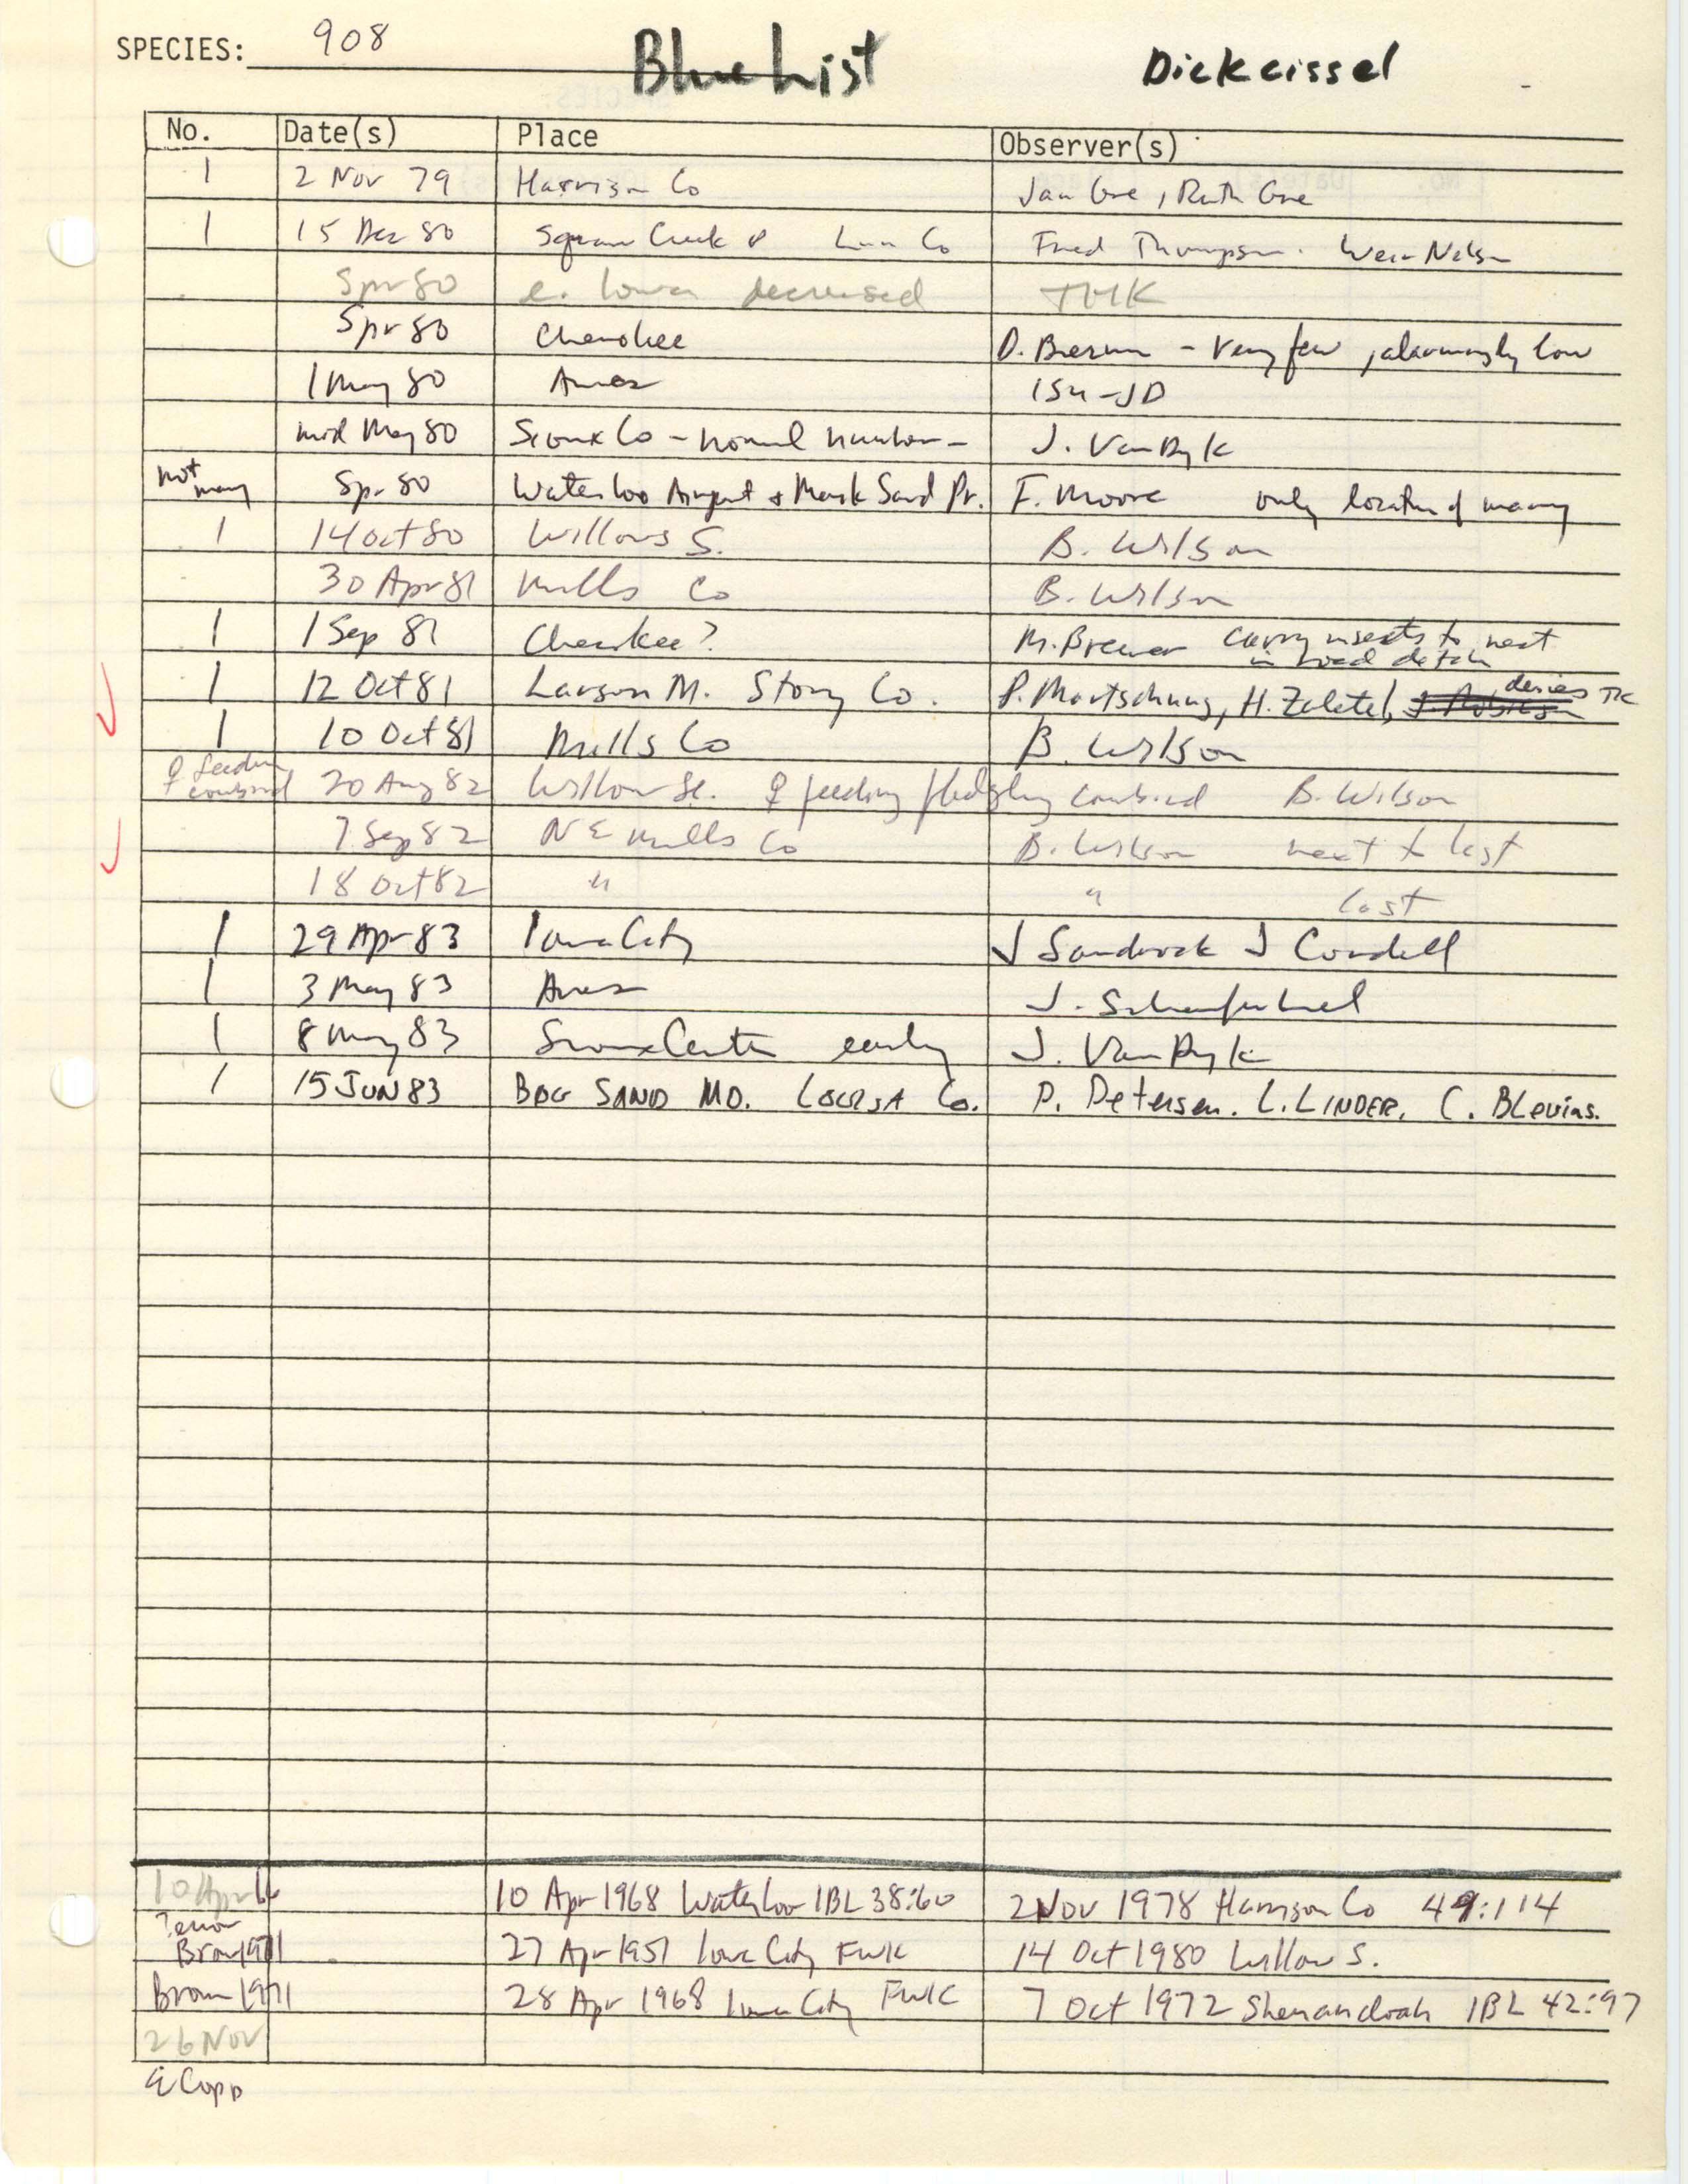 Iowa Ornithologists' Union, field report compiled data, Dickcissel, 1951-1983